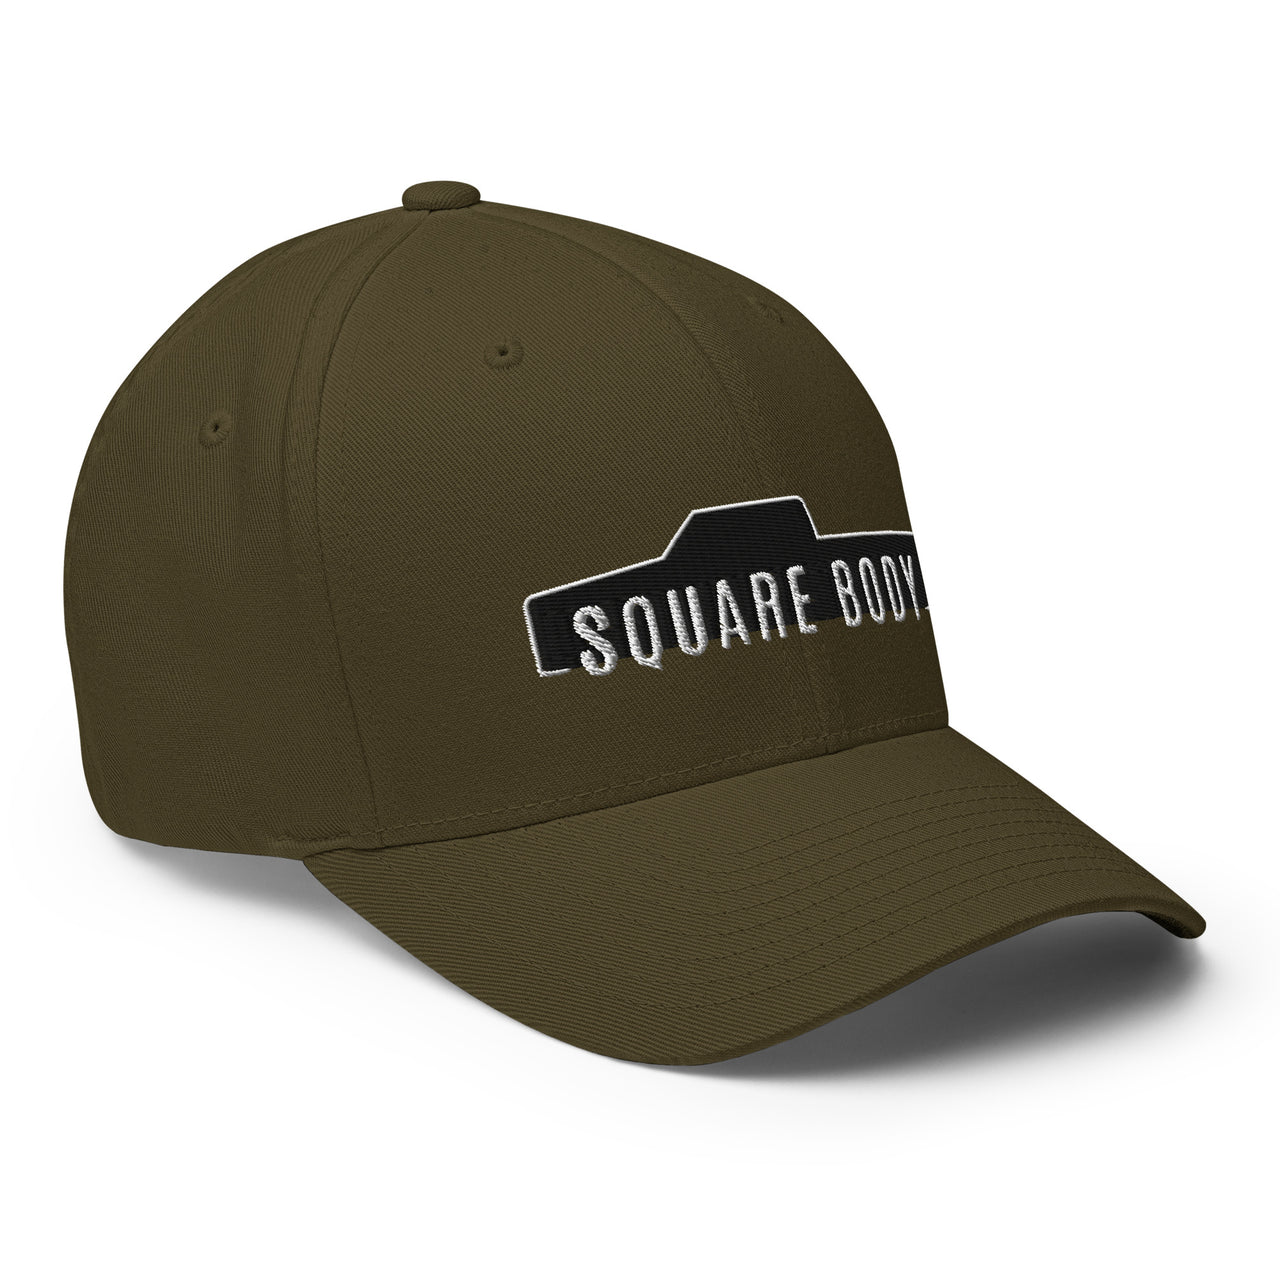 3/4 View of crew cab Square Body Hat From Aggressive Thread in Olive Green